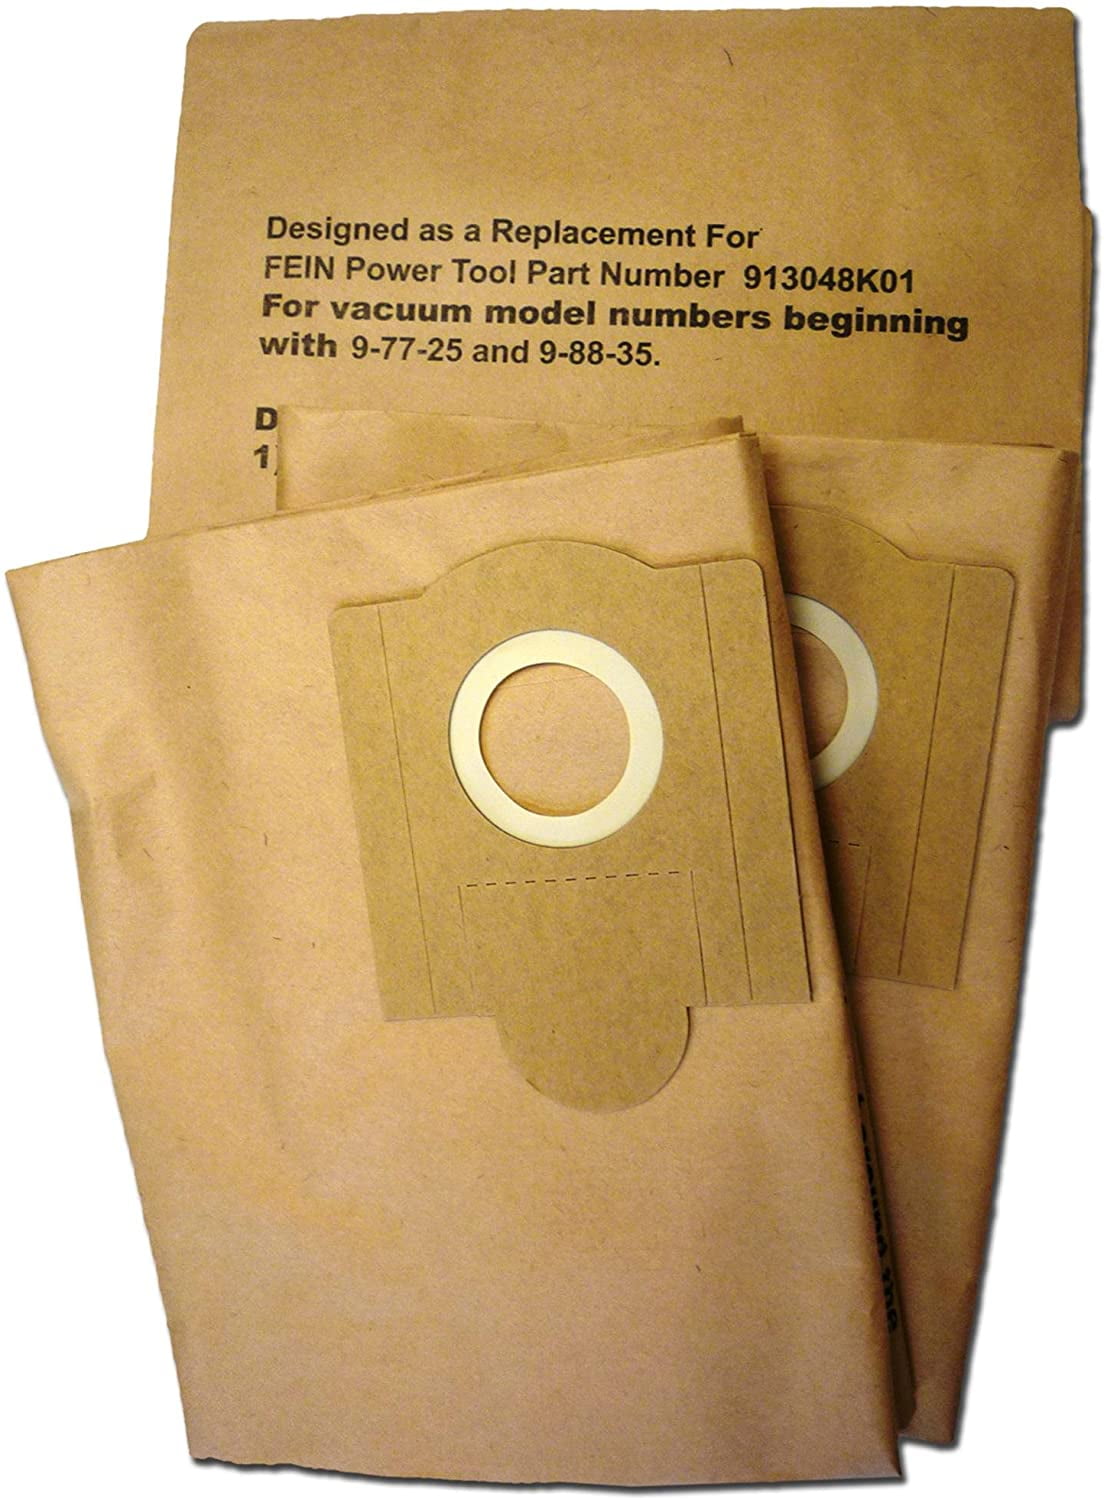 6*Universal Vacuum Cleaner Bags Paper Dust Bag Replace For Rowenta ZR0049&ZR0007 